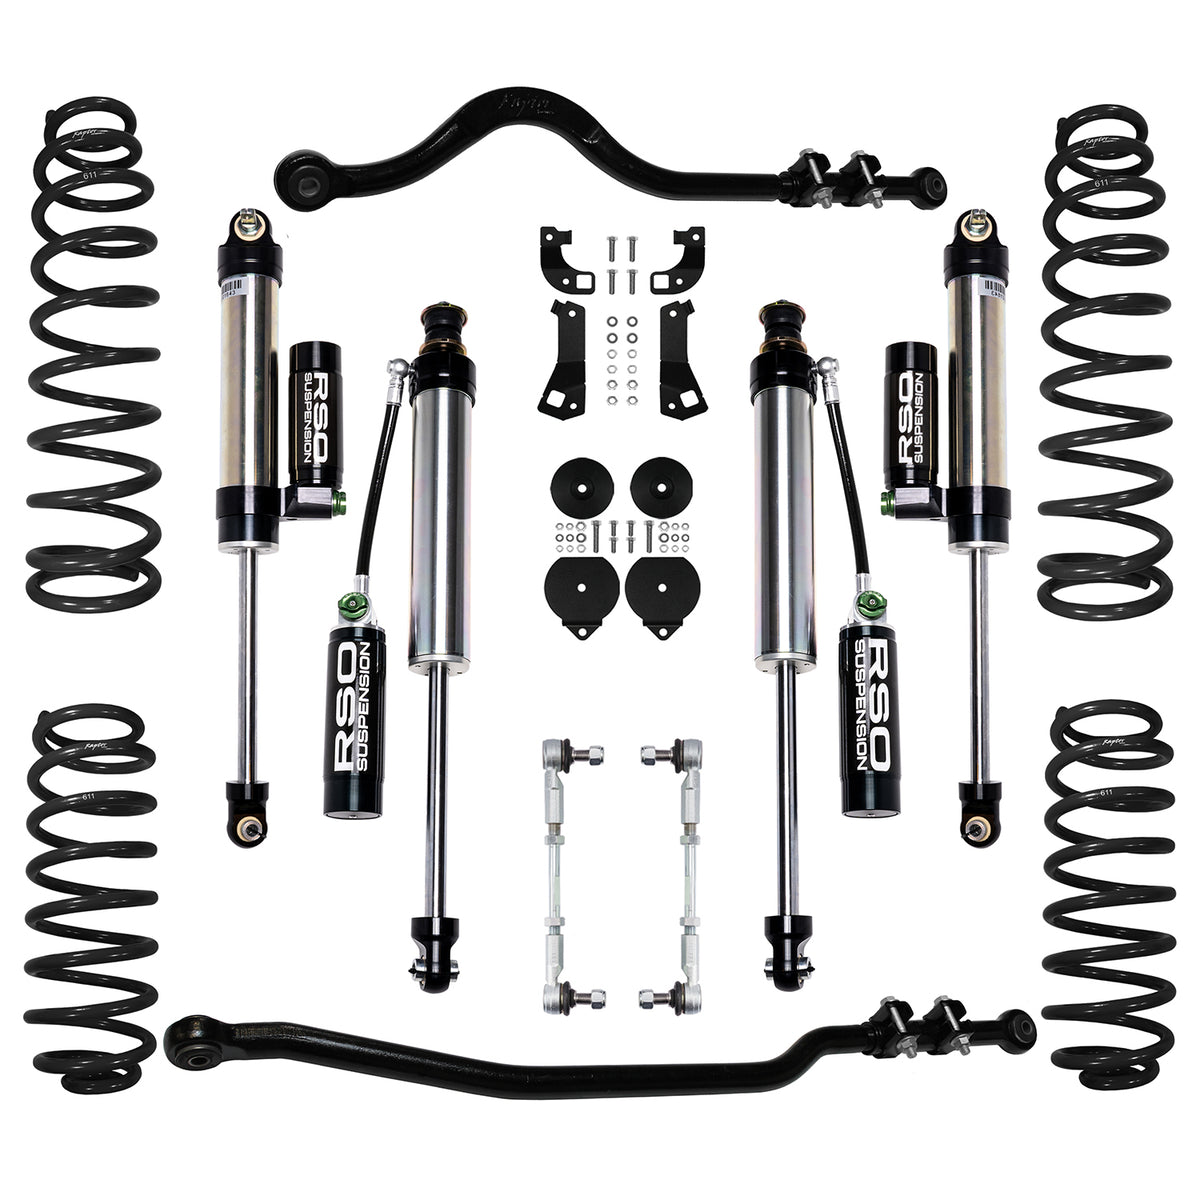 RSO Suspension - KJK2531 - 2.5 Inch Stage 3.1 Lift Kit - 07-18 Jeep Wrangler JK/JKU Lift Height: 2.5in Position: Front And Rear